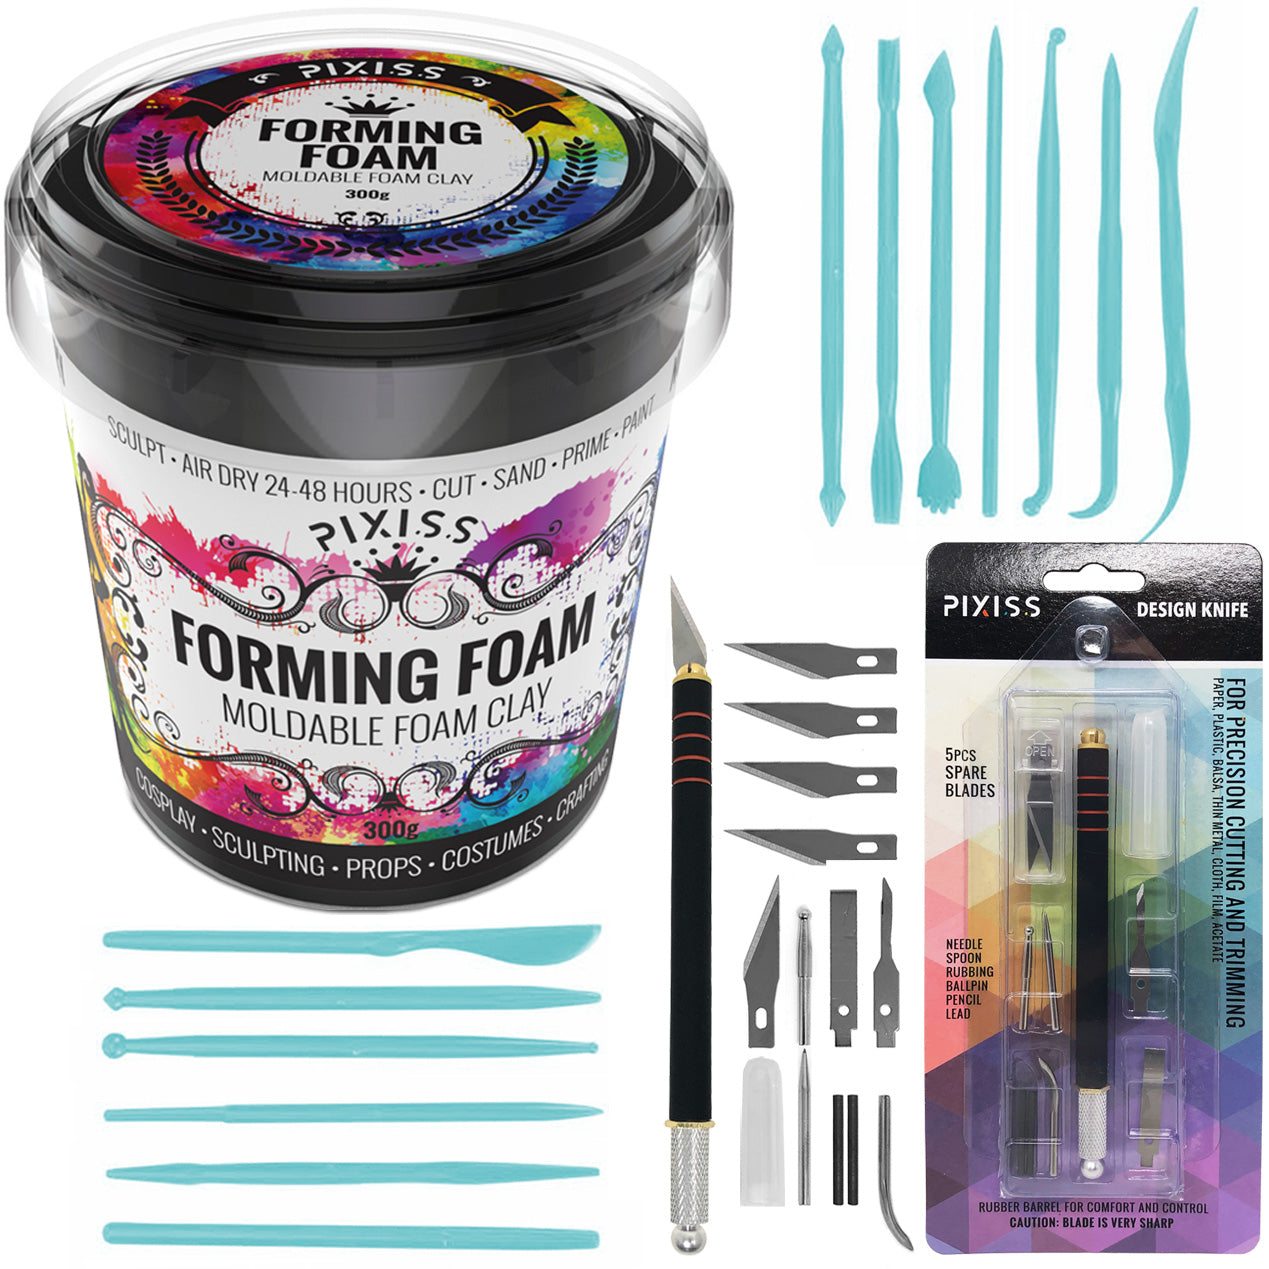 PIXISS Black Forming Foam Crafting Kit with Accessories by Pixiss